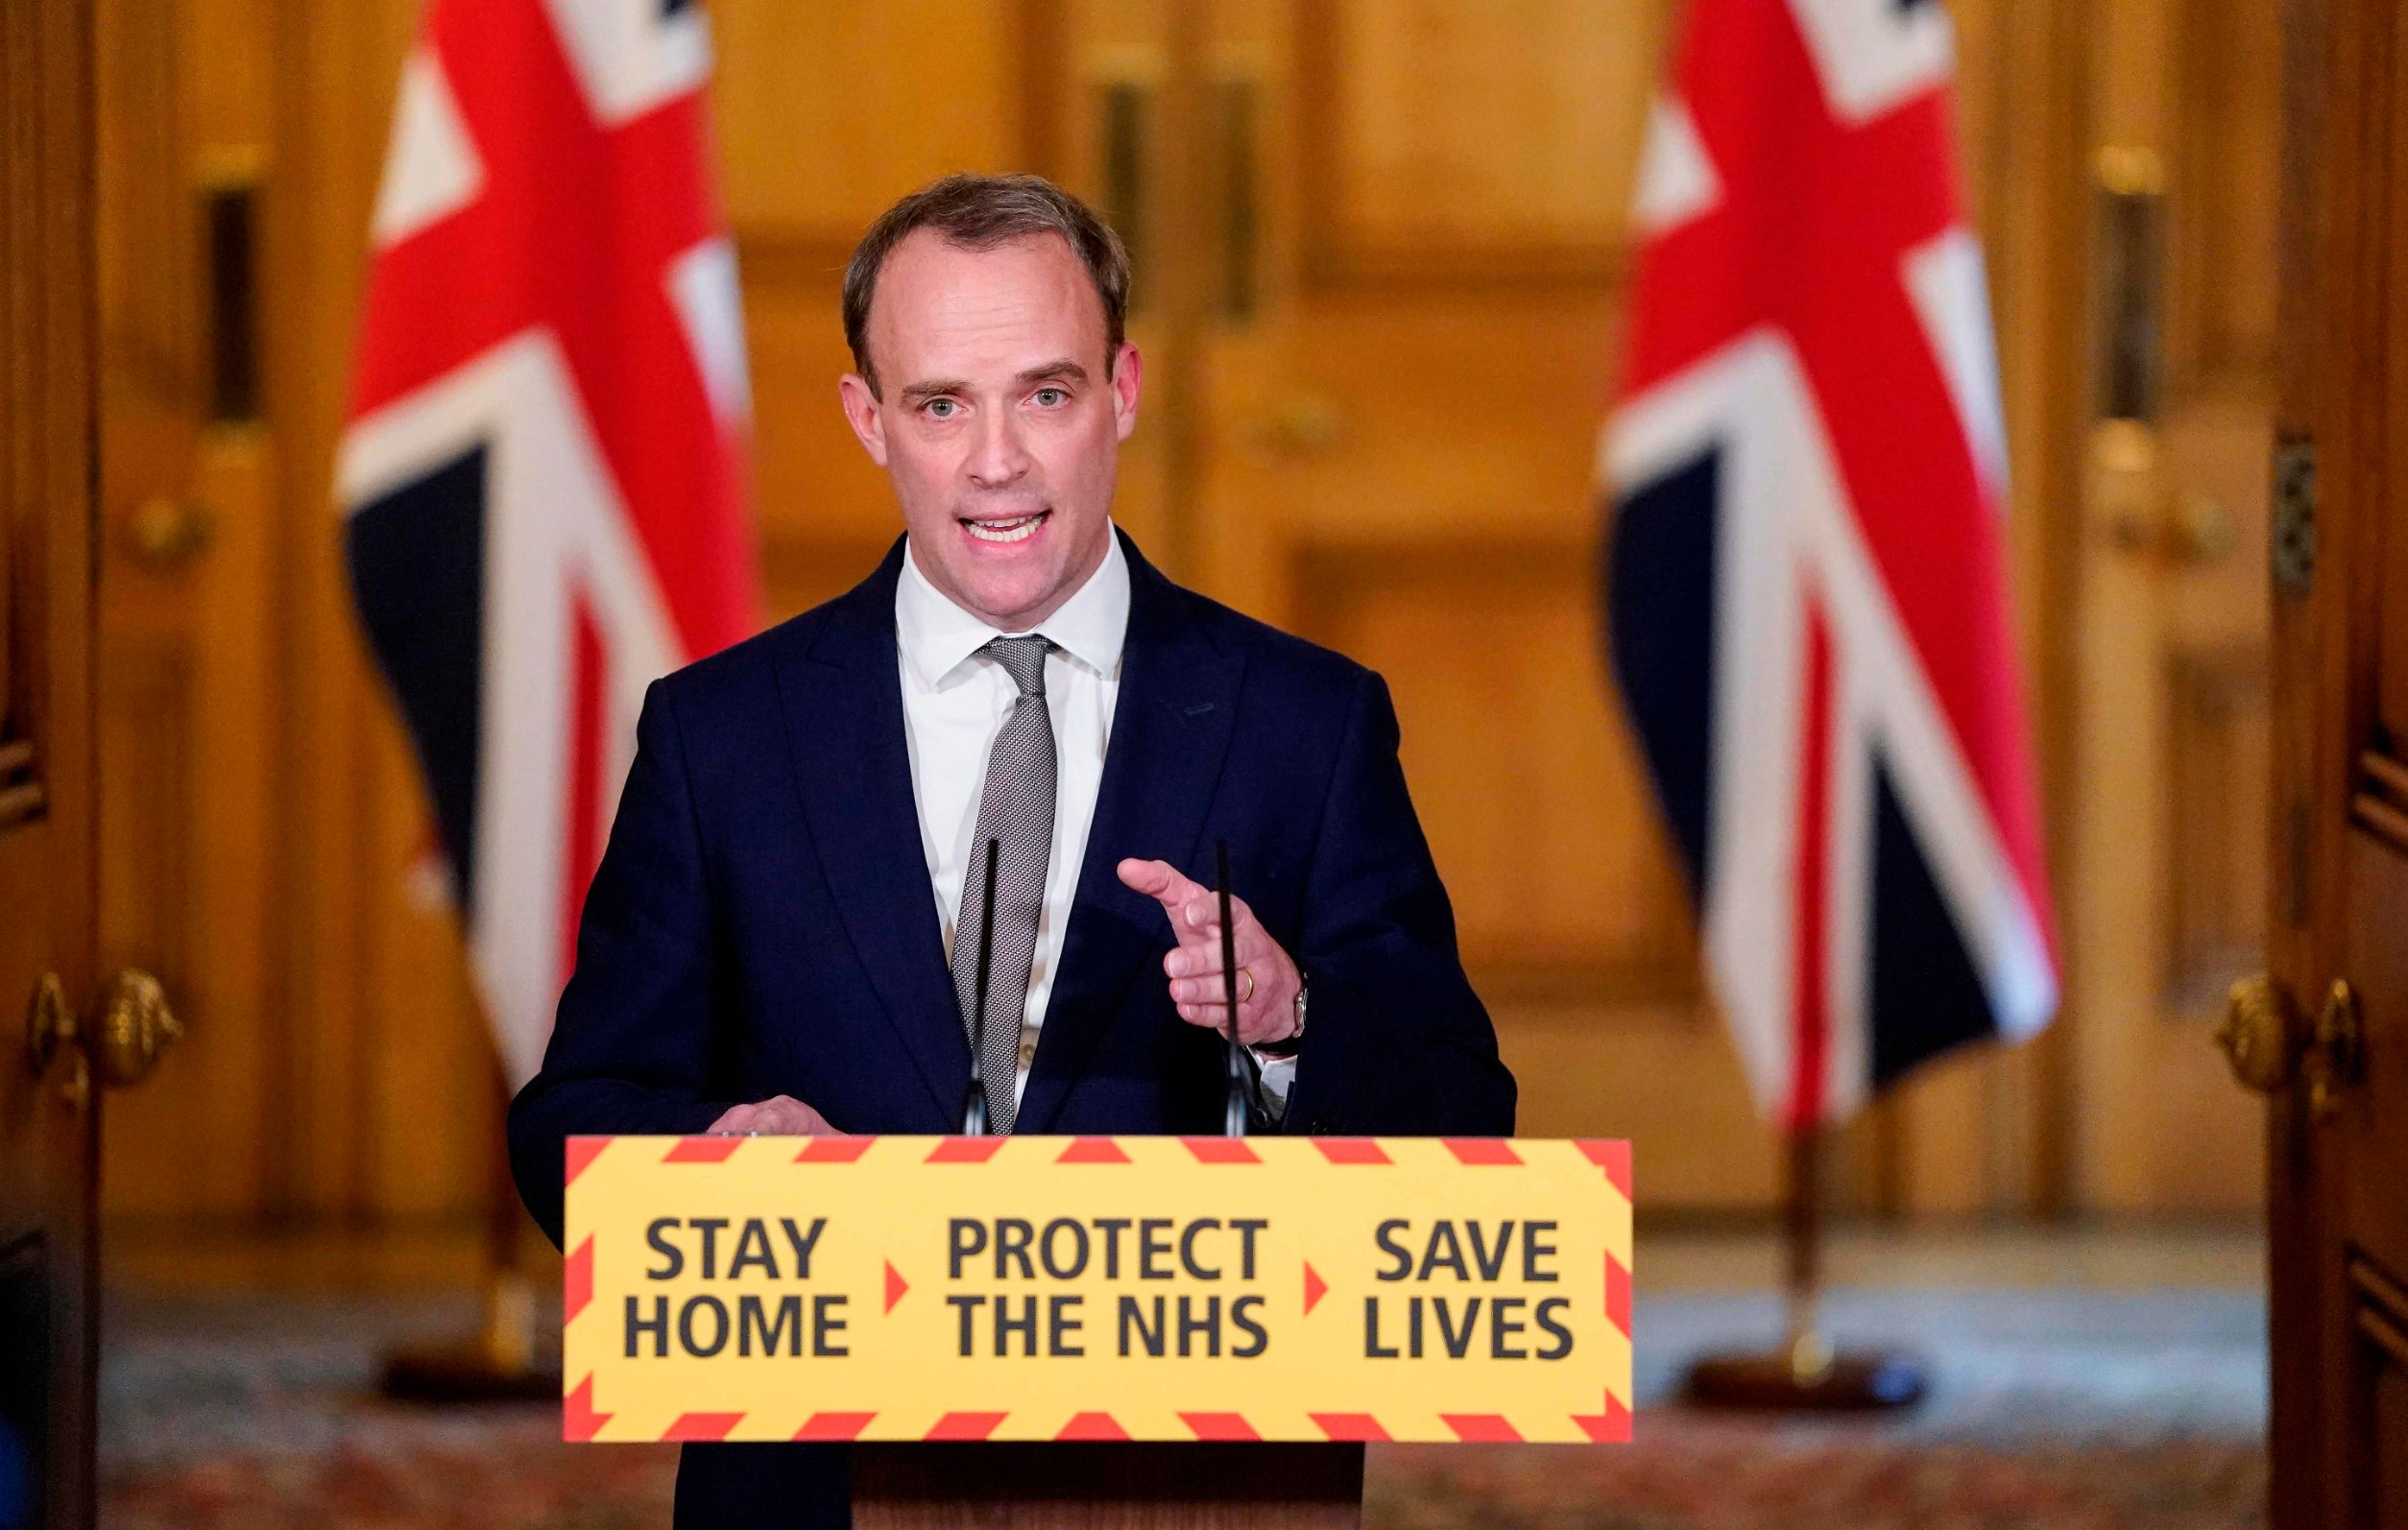 A handout image released by 10 Downing Street, shows Britain's Foreign Secretary Dominic Raab speaking during a remote press conference to update the nation on the Covid-19 pandemic, inside 10 Downing Street in central London on April 16, 2020. - Britain will extend its coronavirus lockdown for 